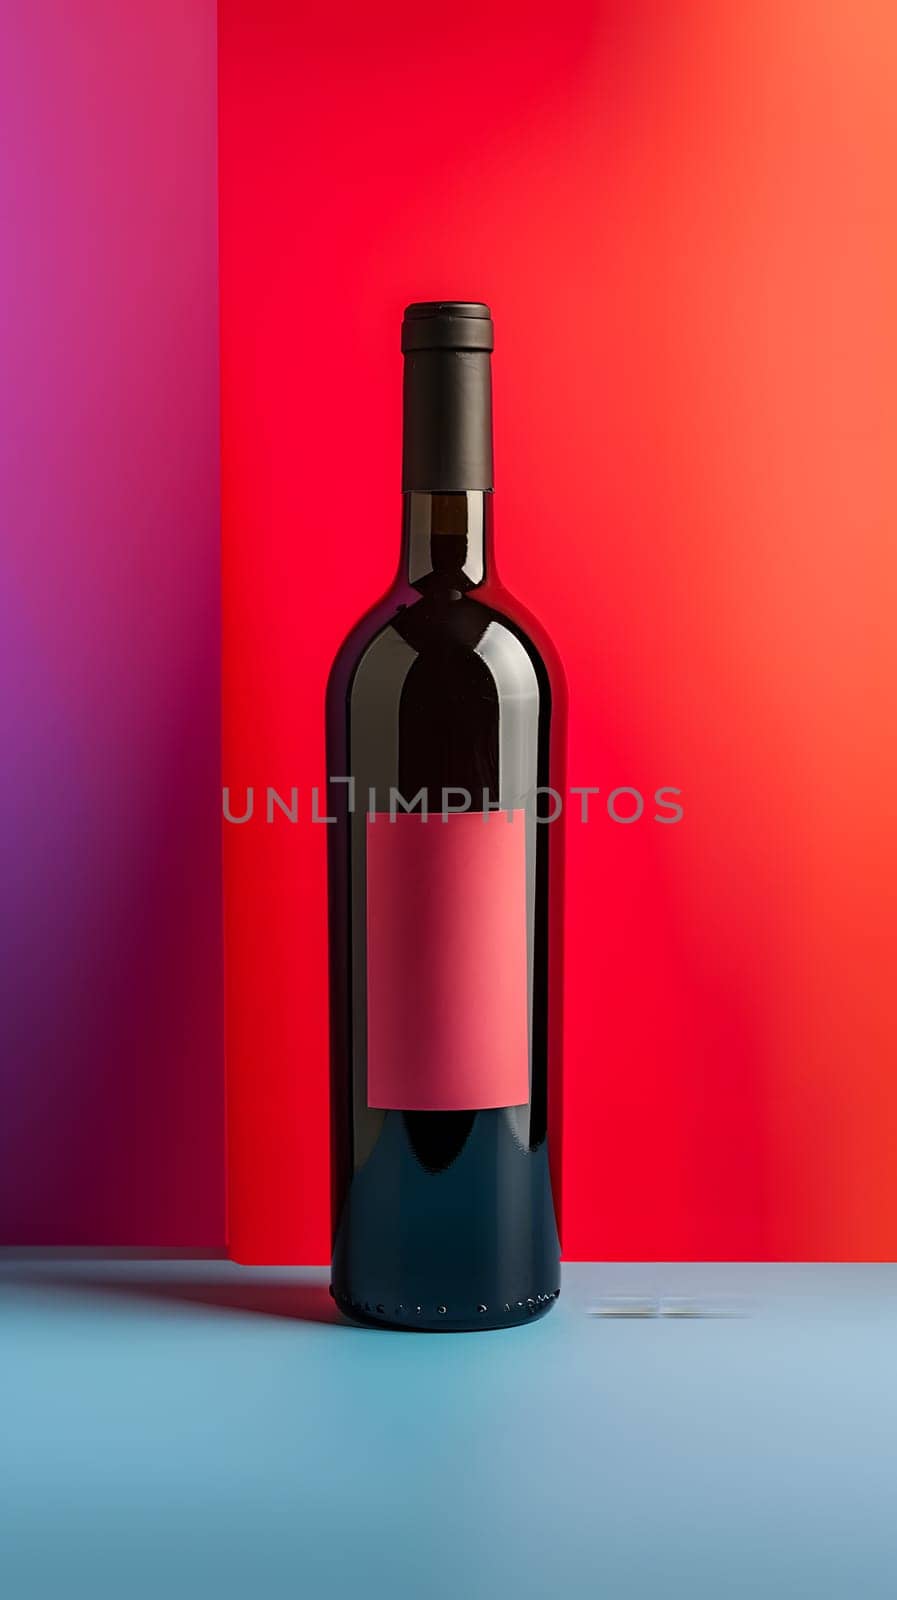 Pinklabeled red wine bottle on colorful background by Nadtochiy